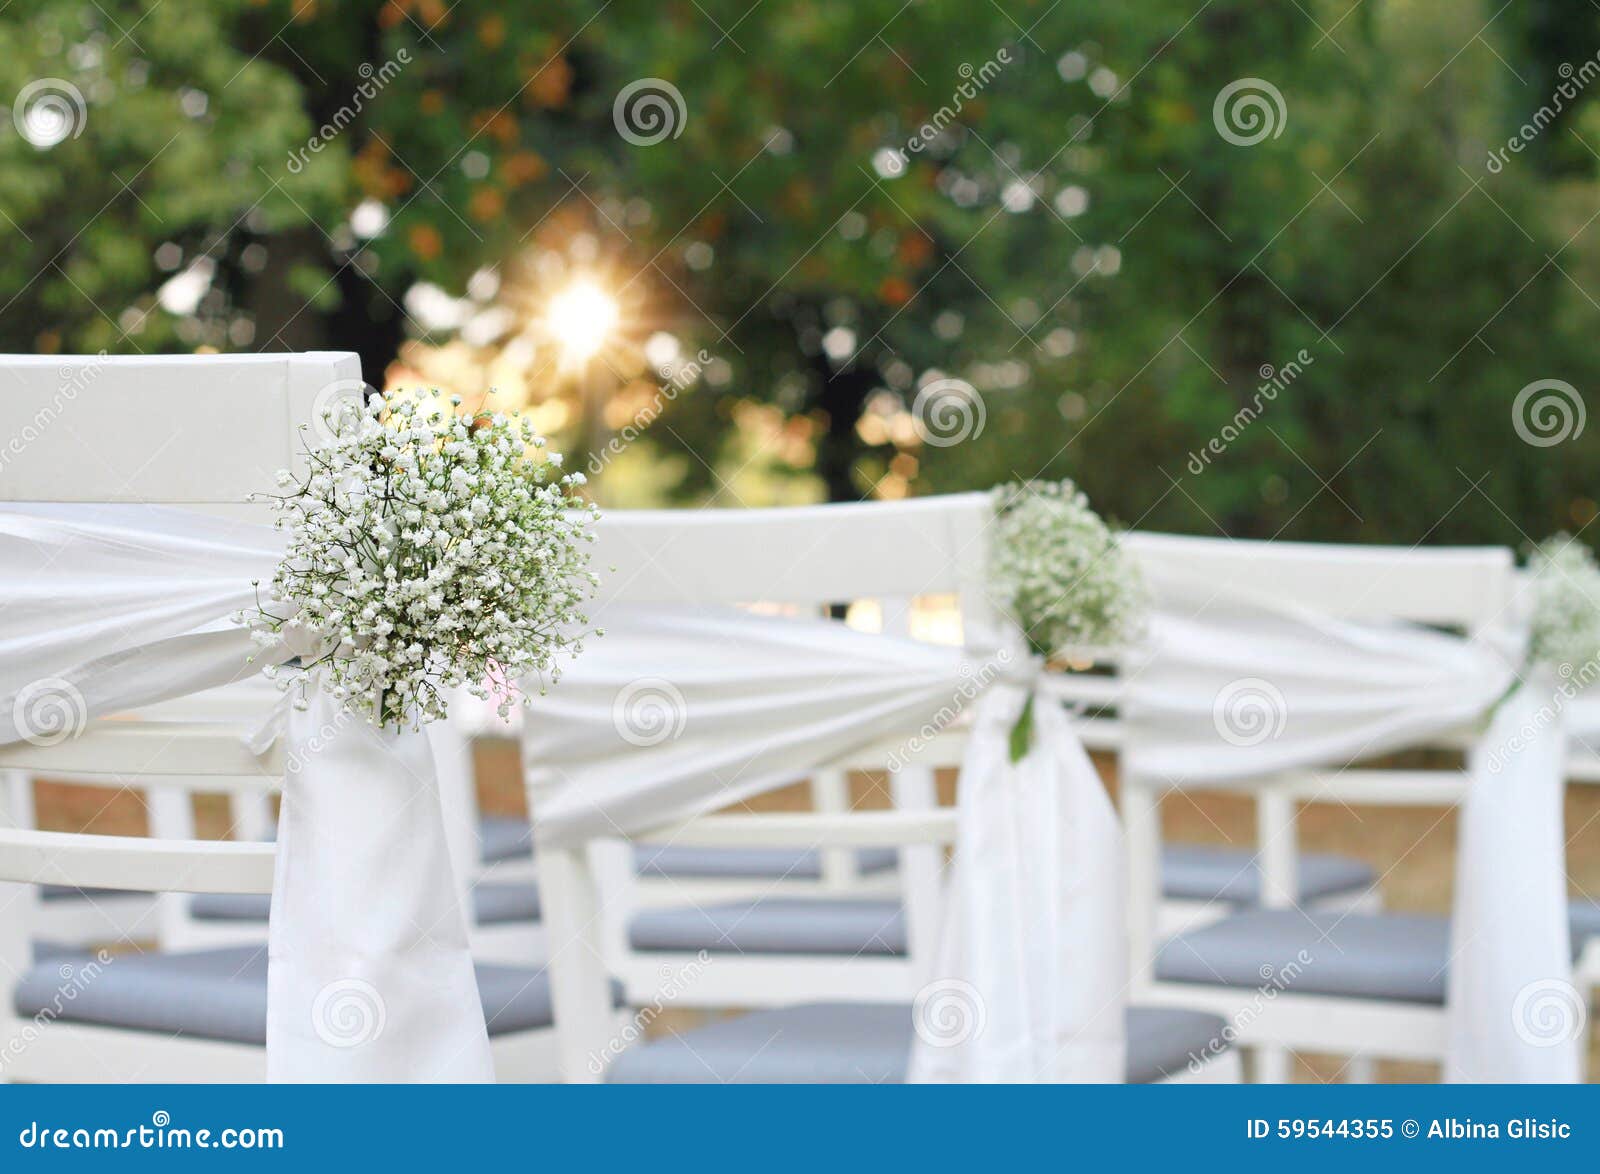 White Flowers Rustic Chic Outdoor Chair Autumn Wedding Decoration